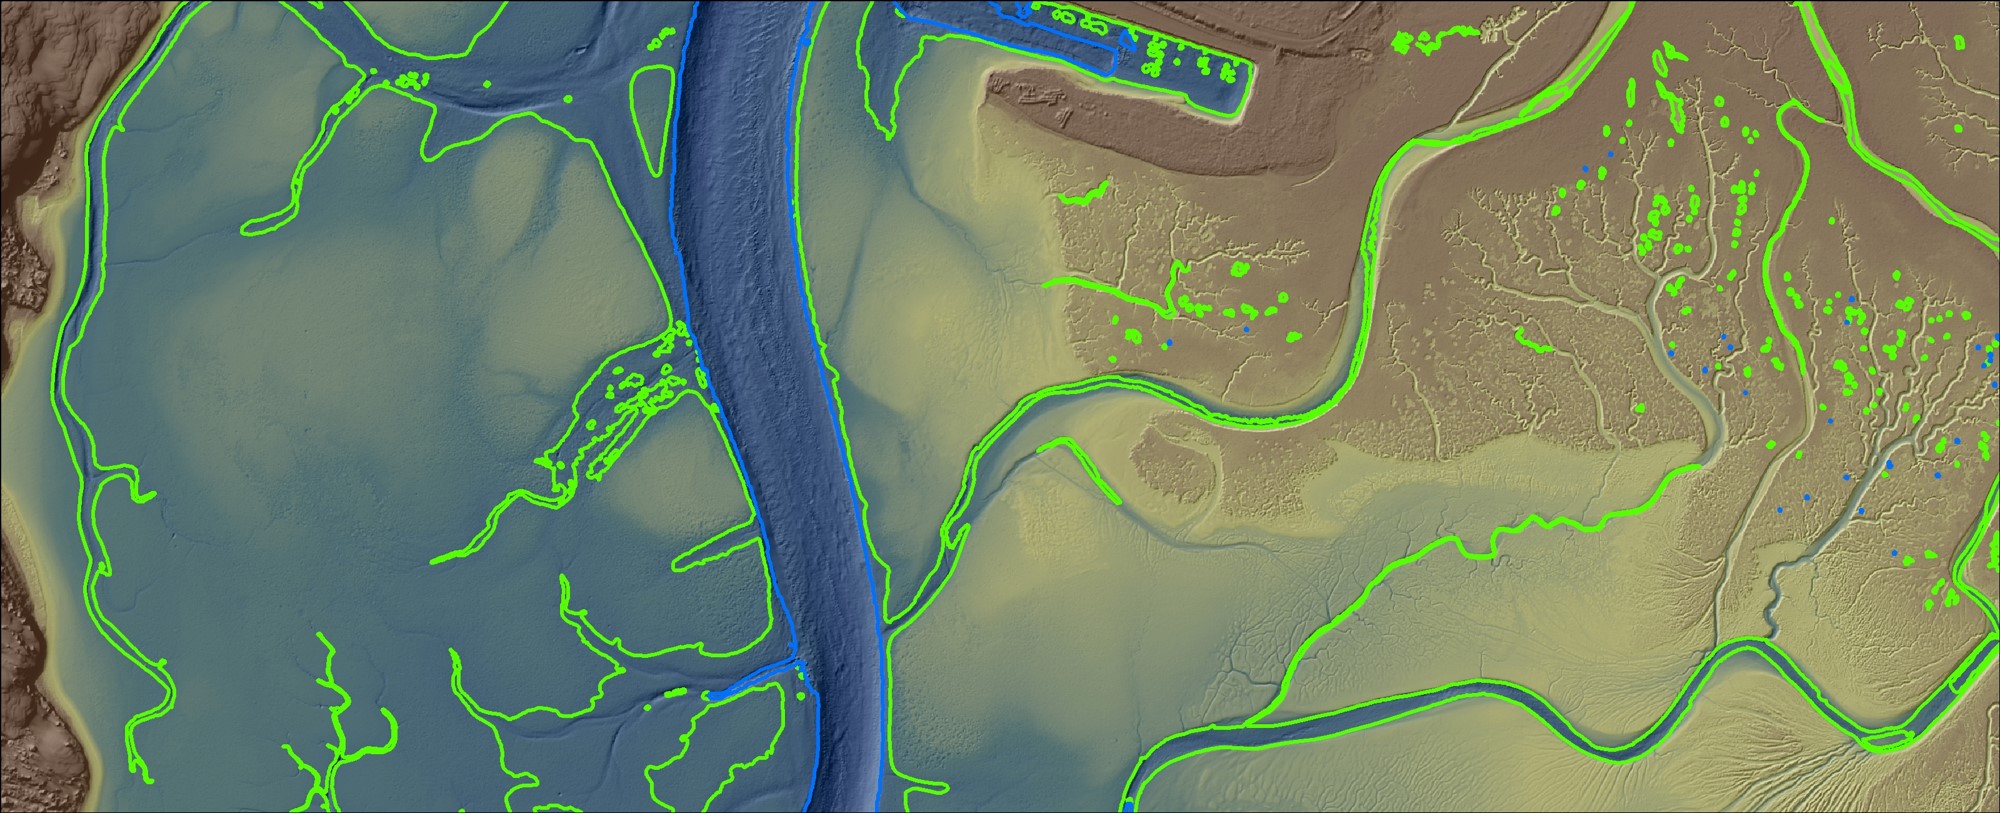 Screengrab of visualization of eelgrass data in Morro Bay showing shallow water and deep water.